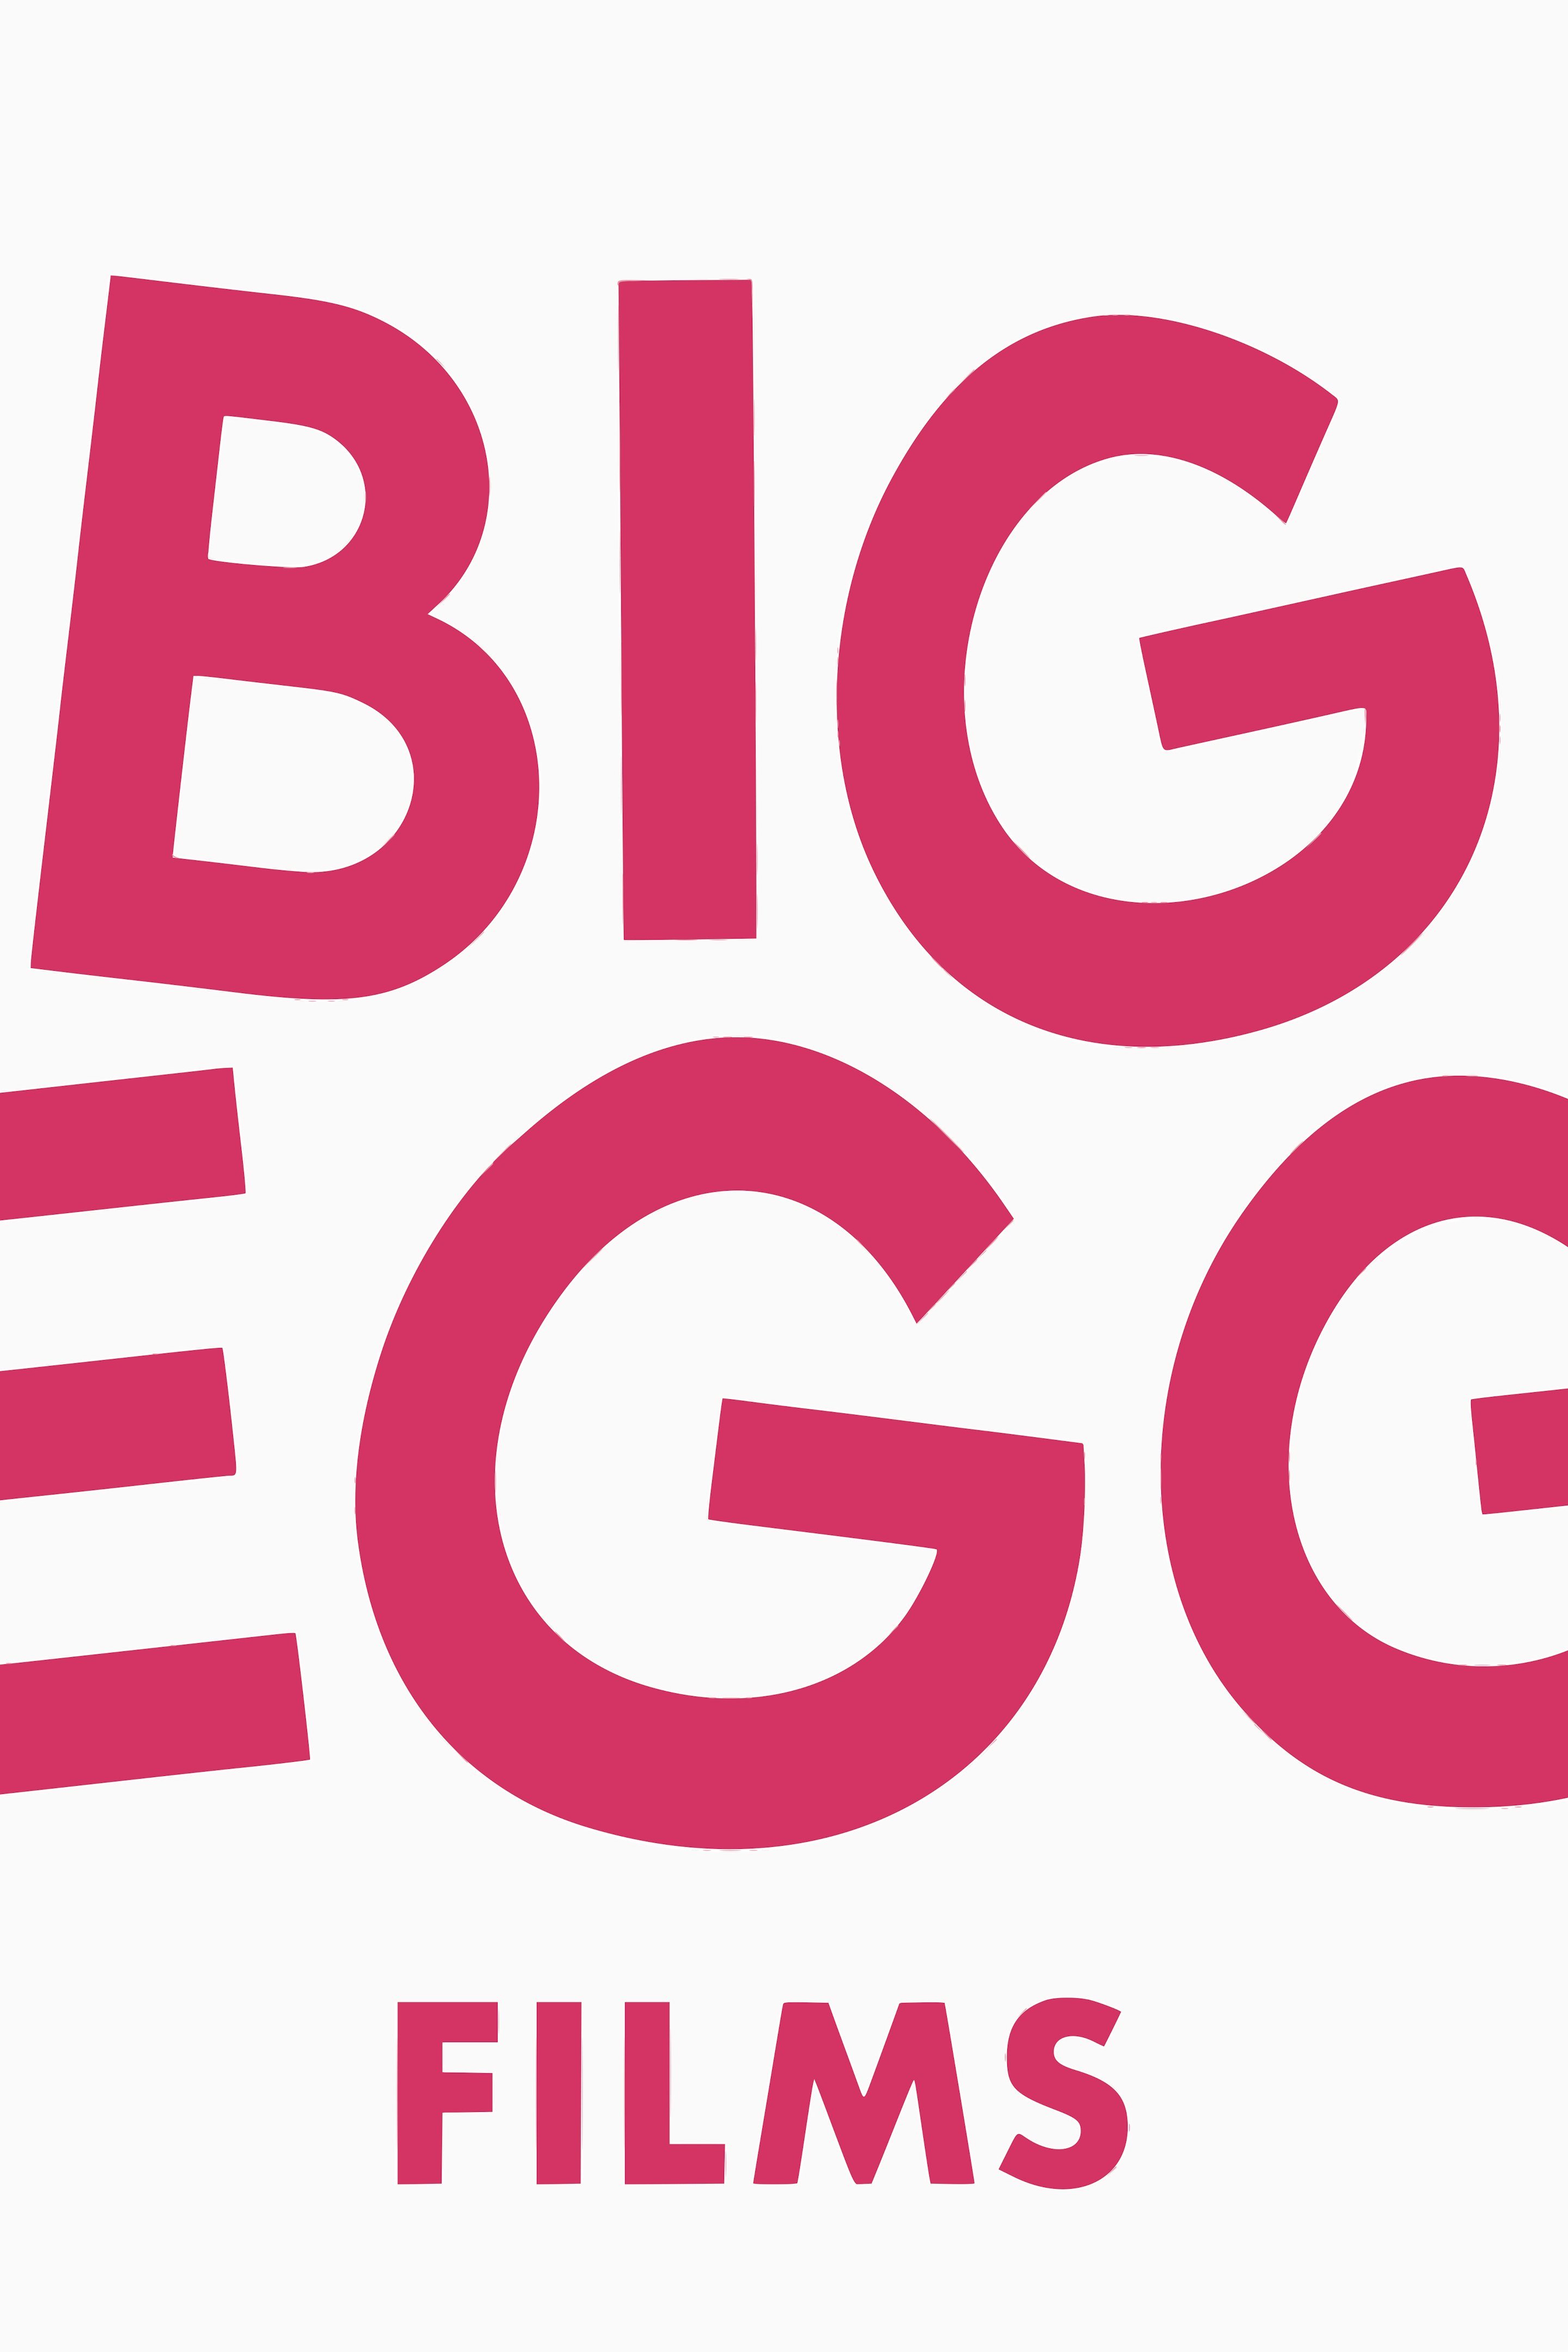 Big Egg gets a brand new shell